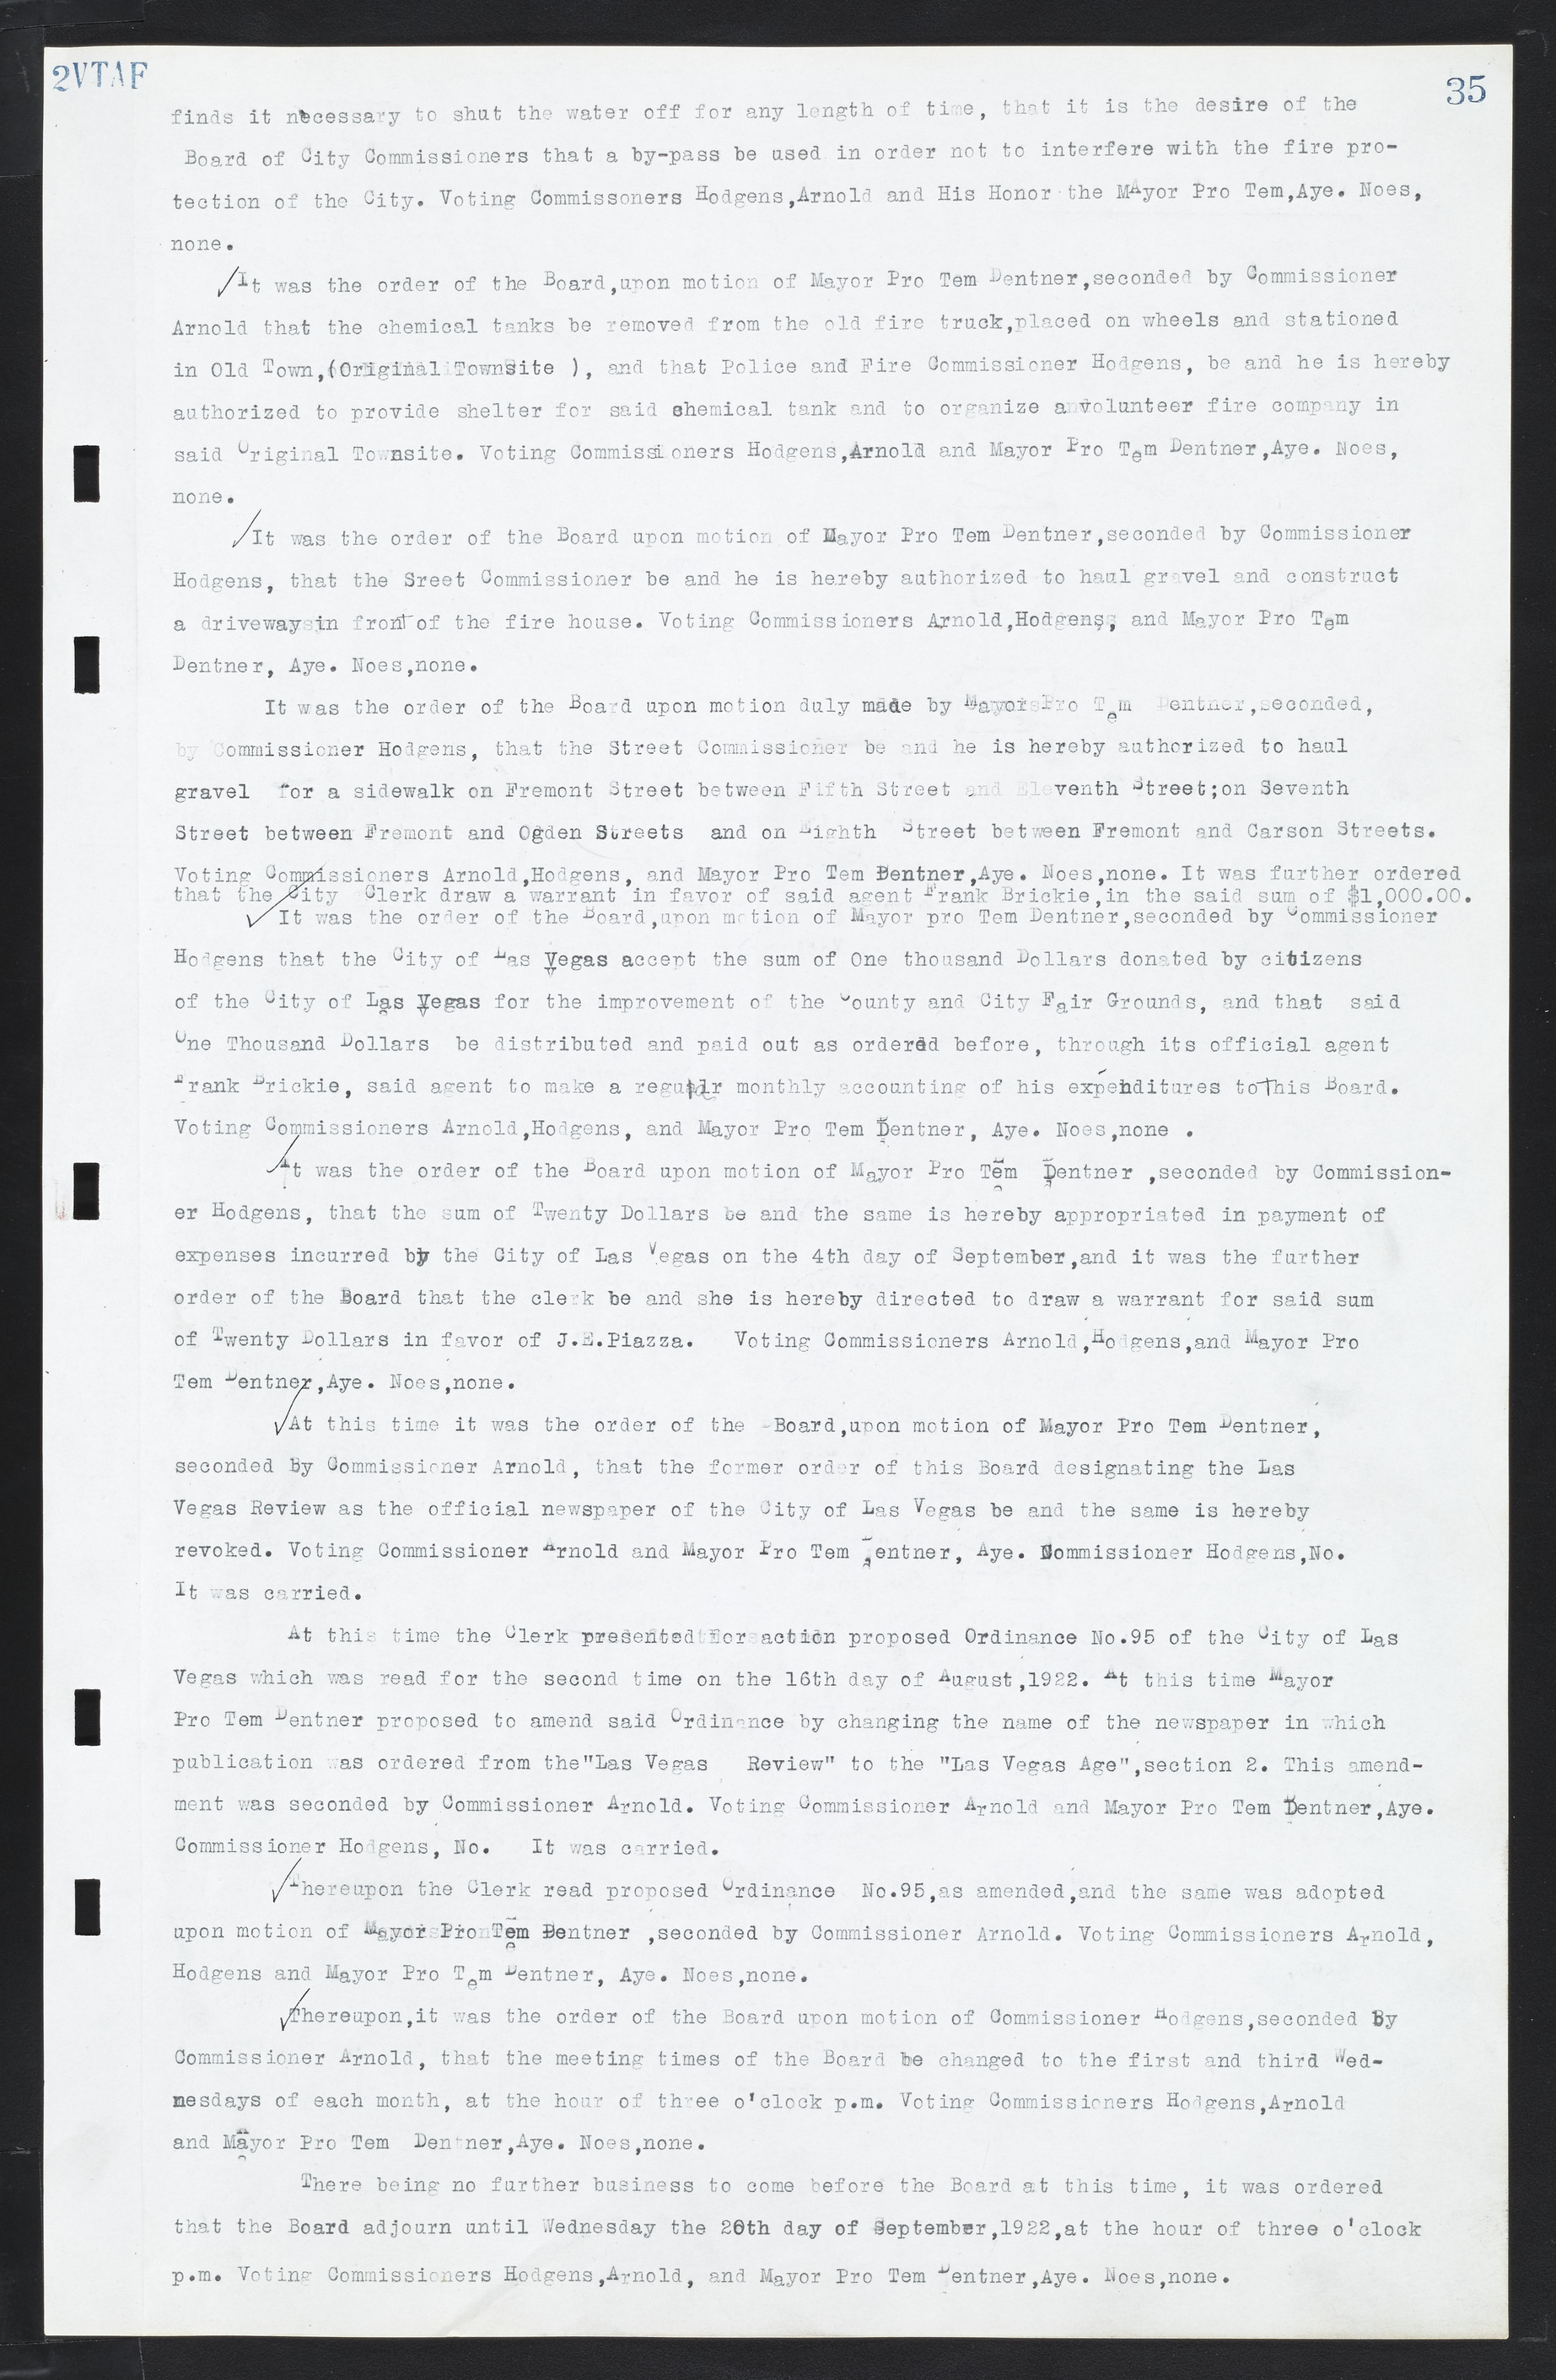 Las Vegas City Commission Minutes, March 1, 1922 to May 10, 1929, lvc000002-42